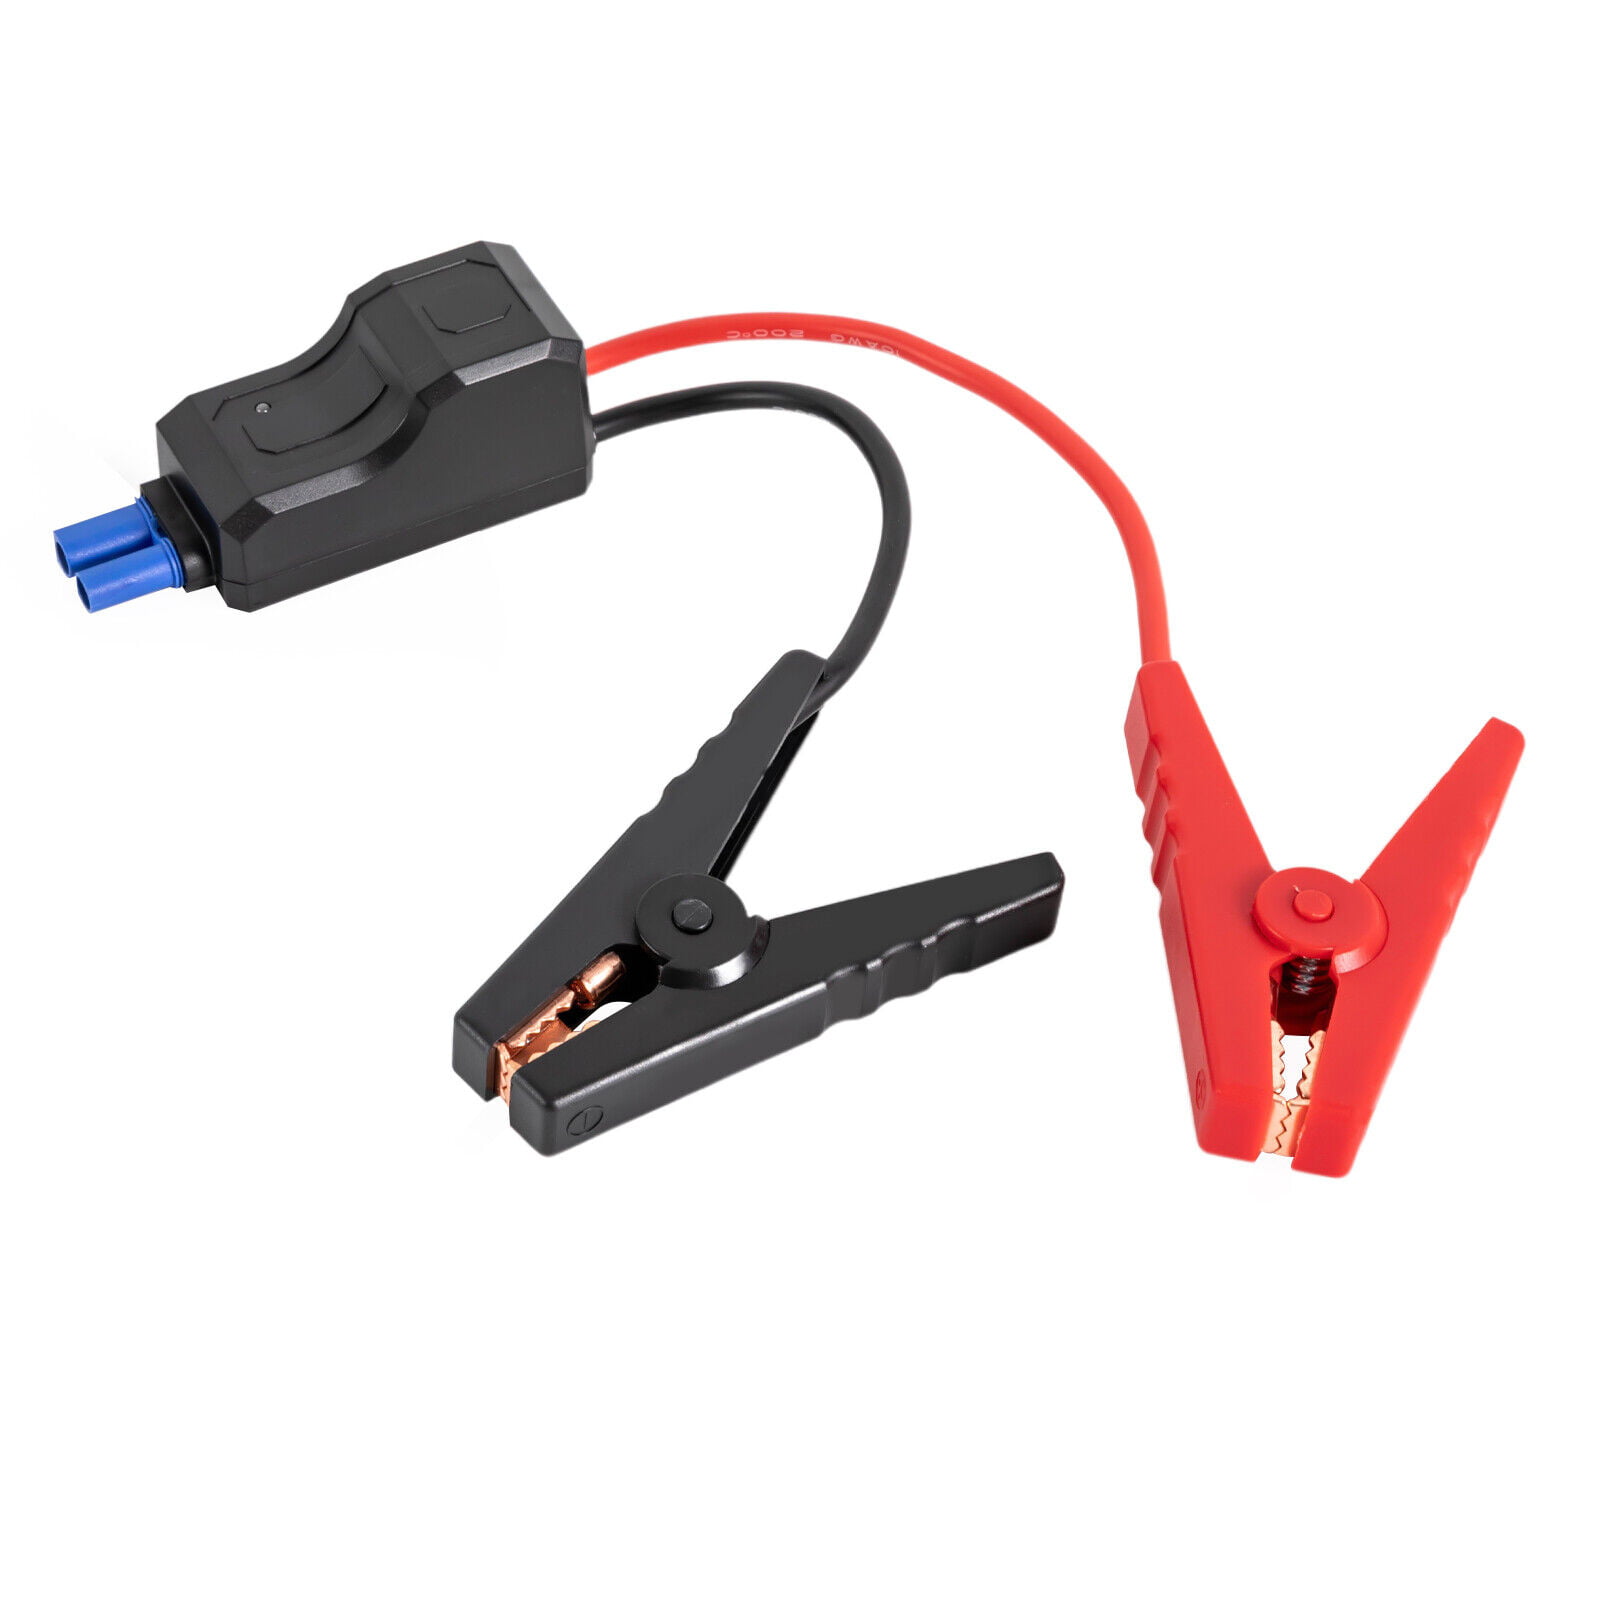 carempire Car Jumper Battery Cables 600AMP Booster Cable Emergency For Car  VanTruck Terminals Jump Starter Leads Clip Car Accessories 7 ft Battery  Jumper Cable Price in India - Buy carempire Car Jumper